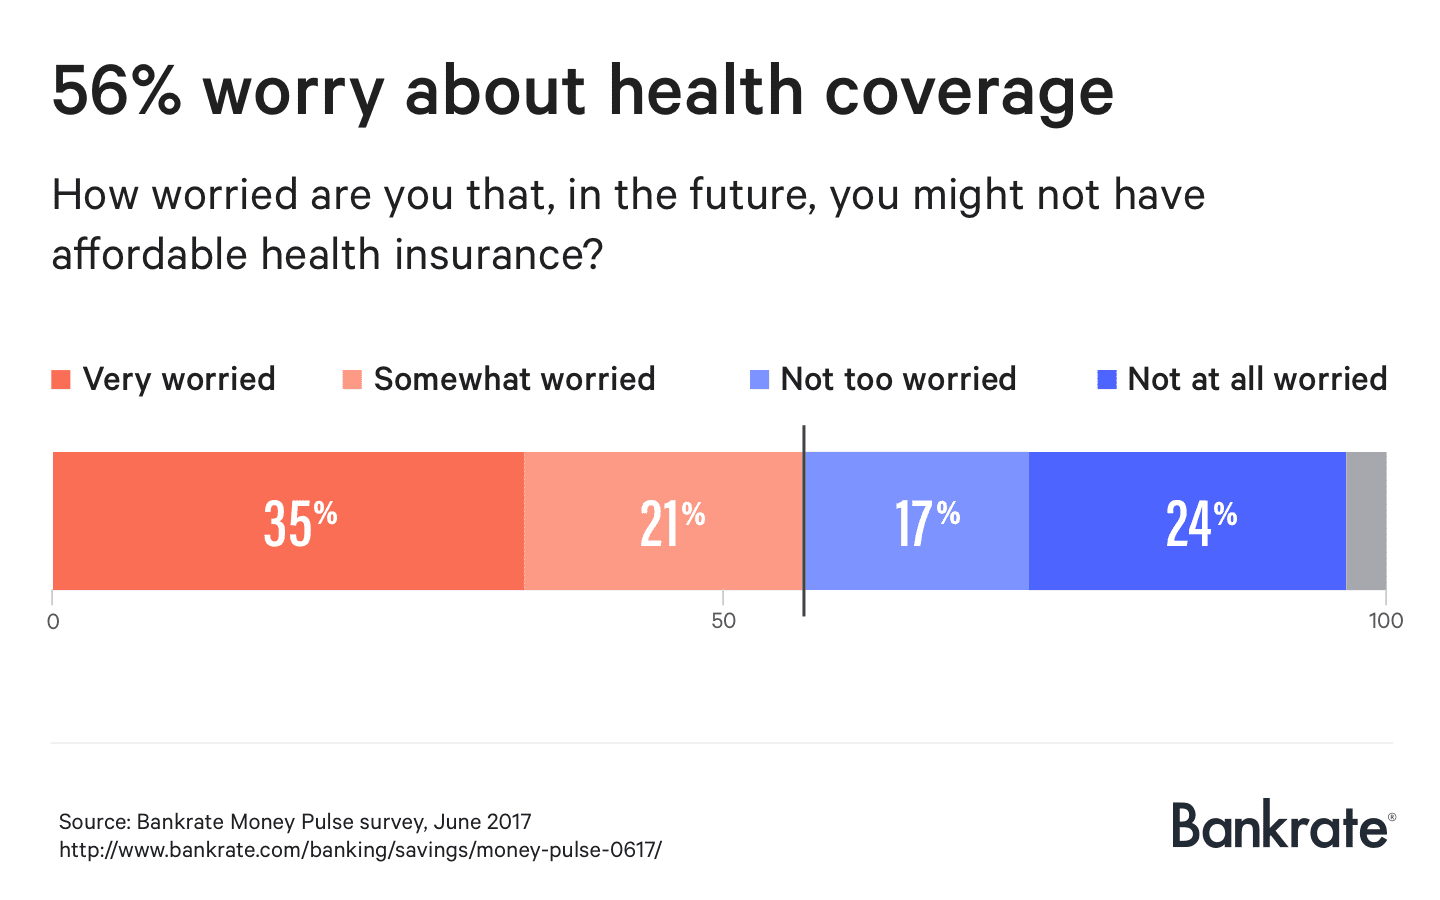 56% worry about health coverage